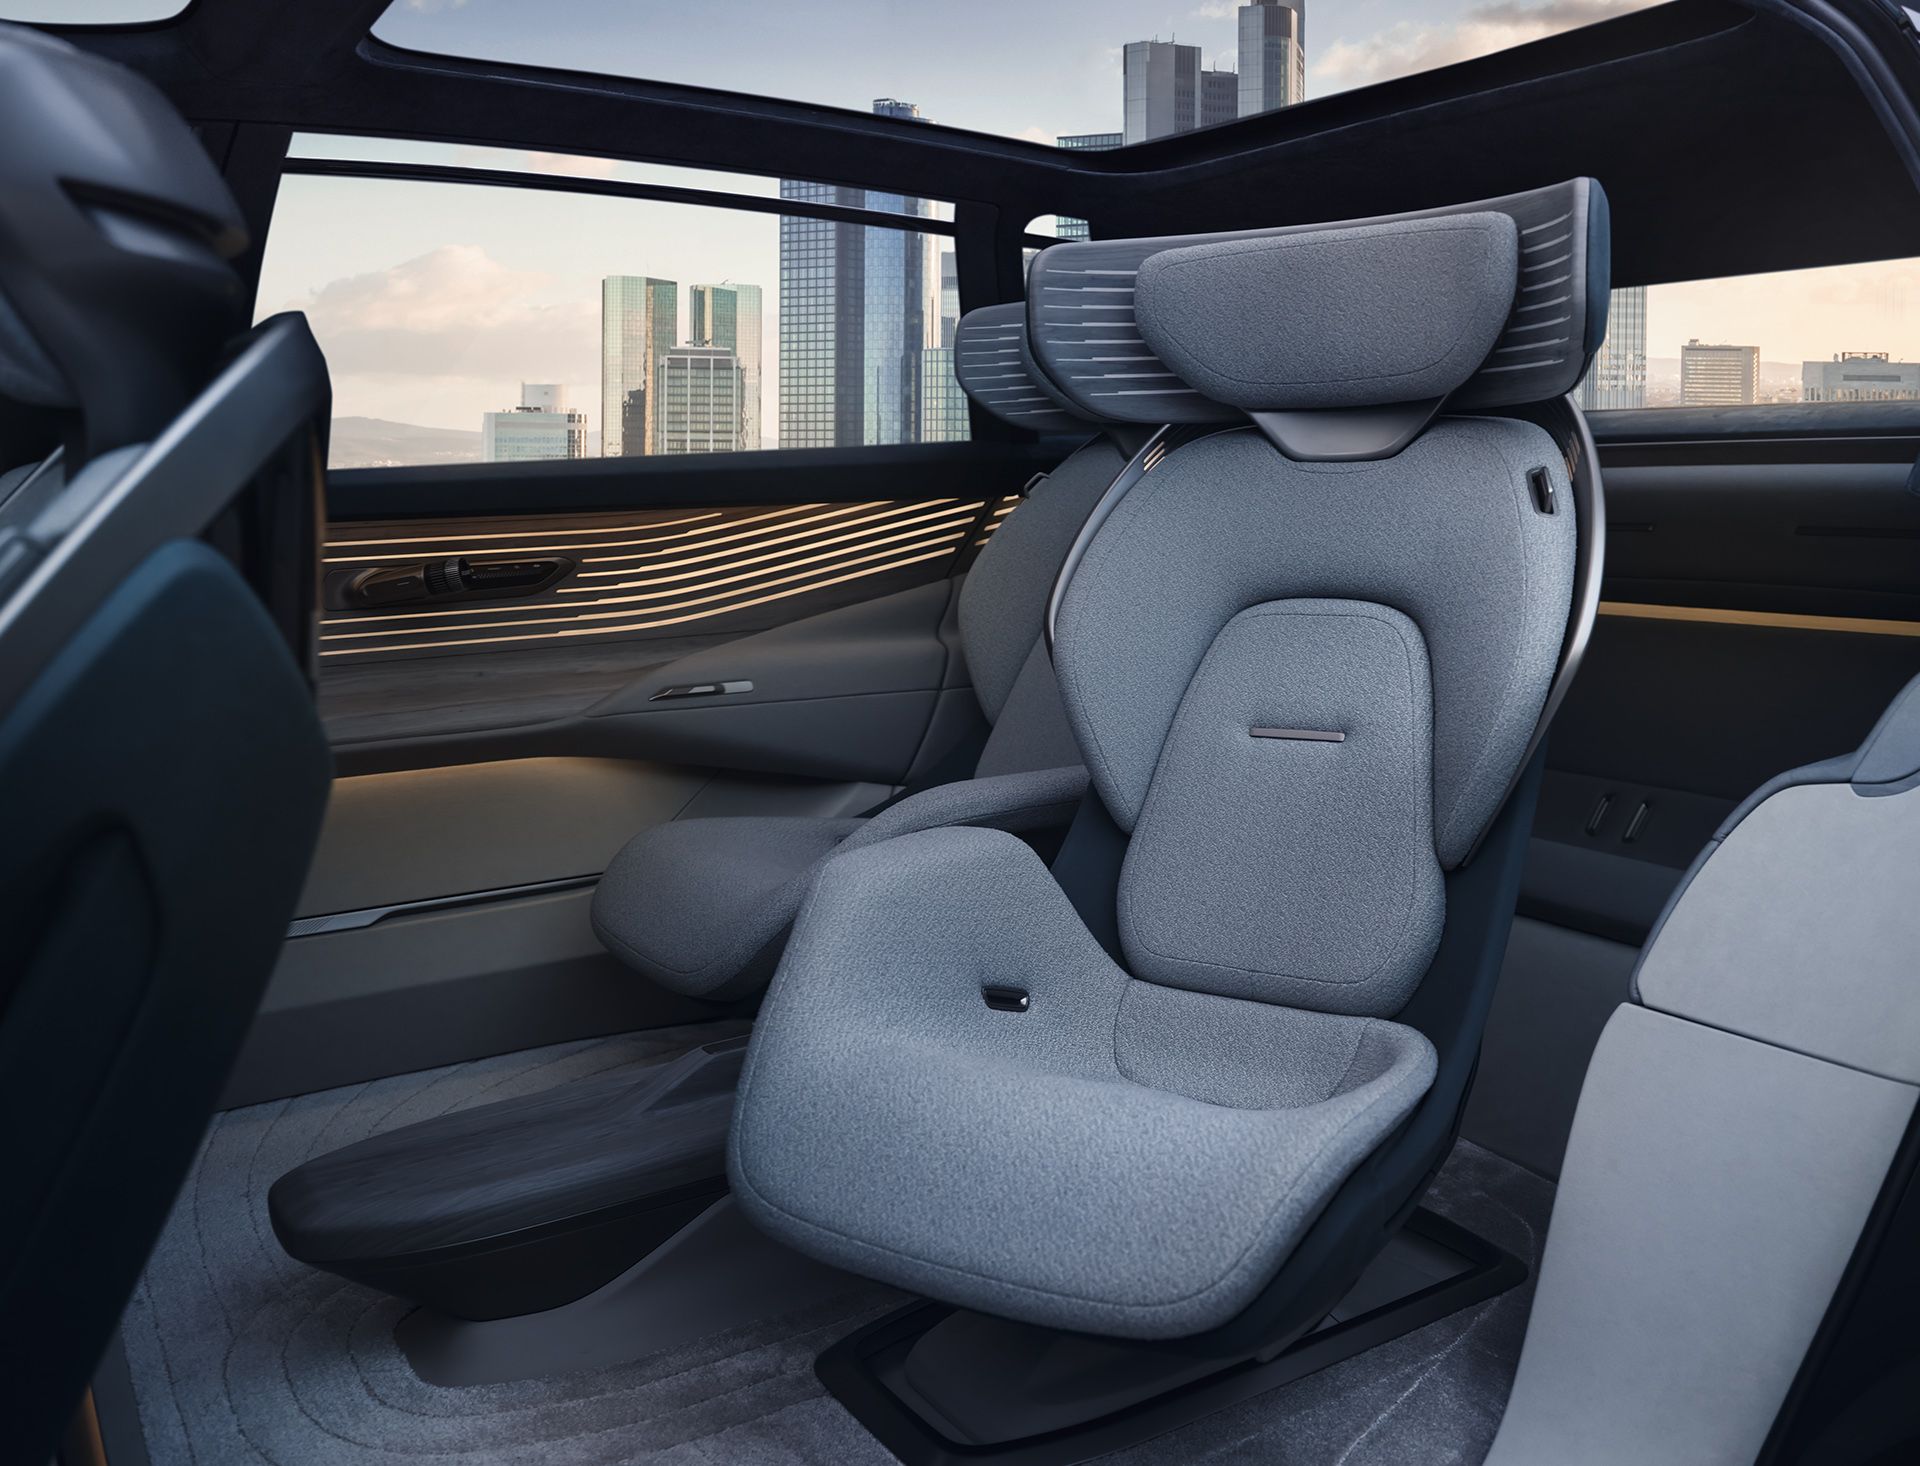 Seats in the interior of the Audi urbansphere concept.